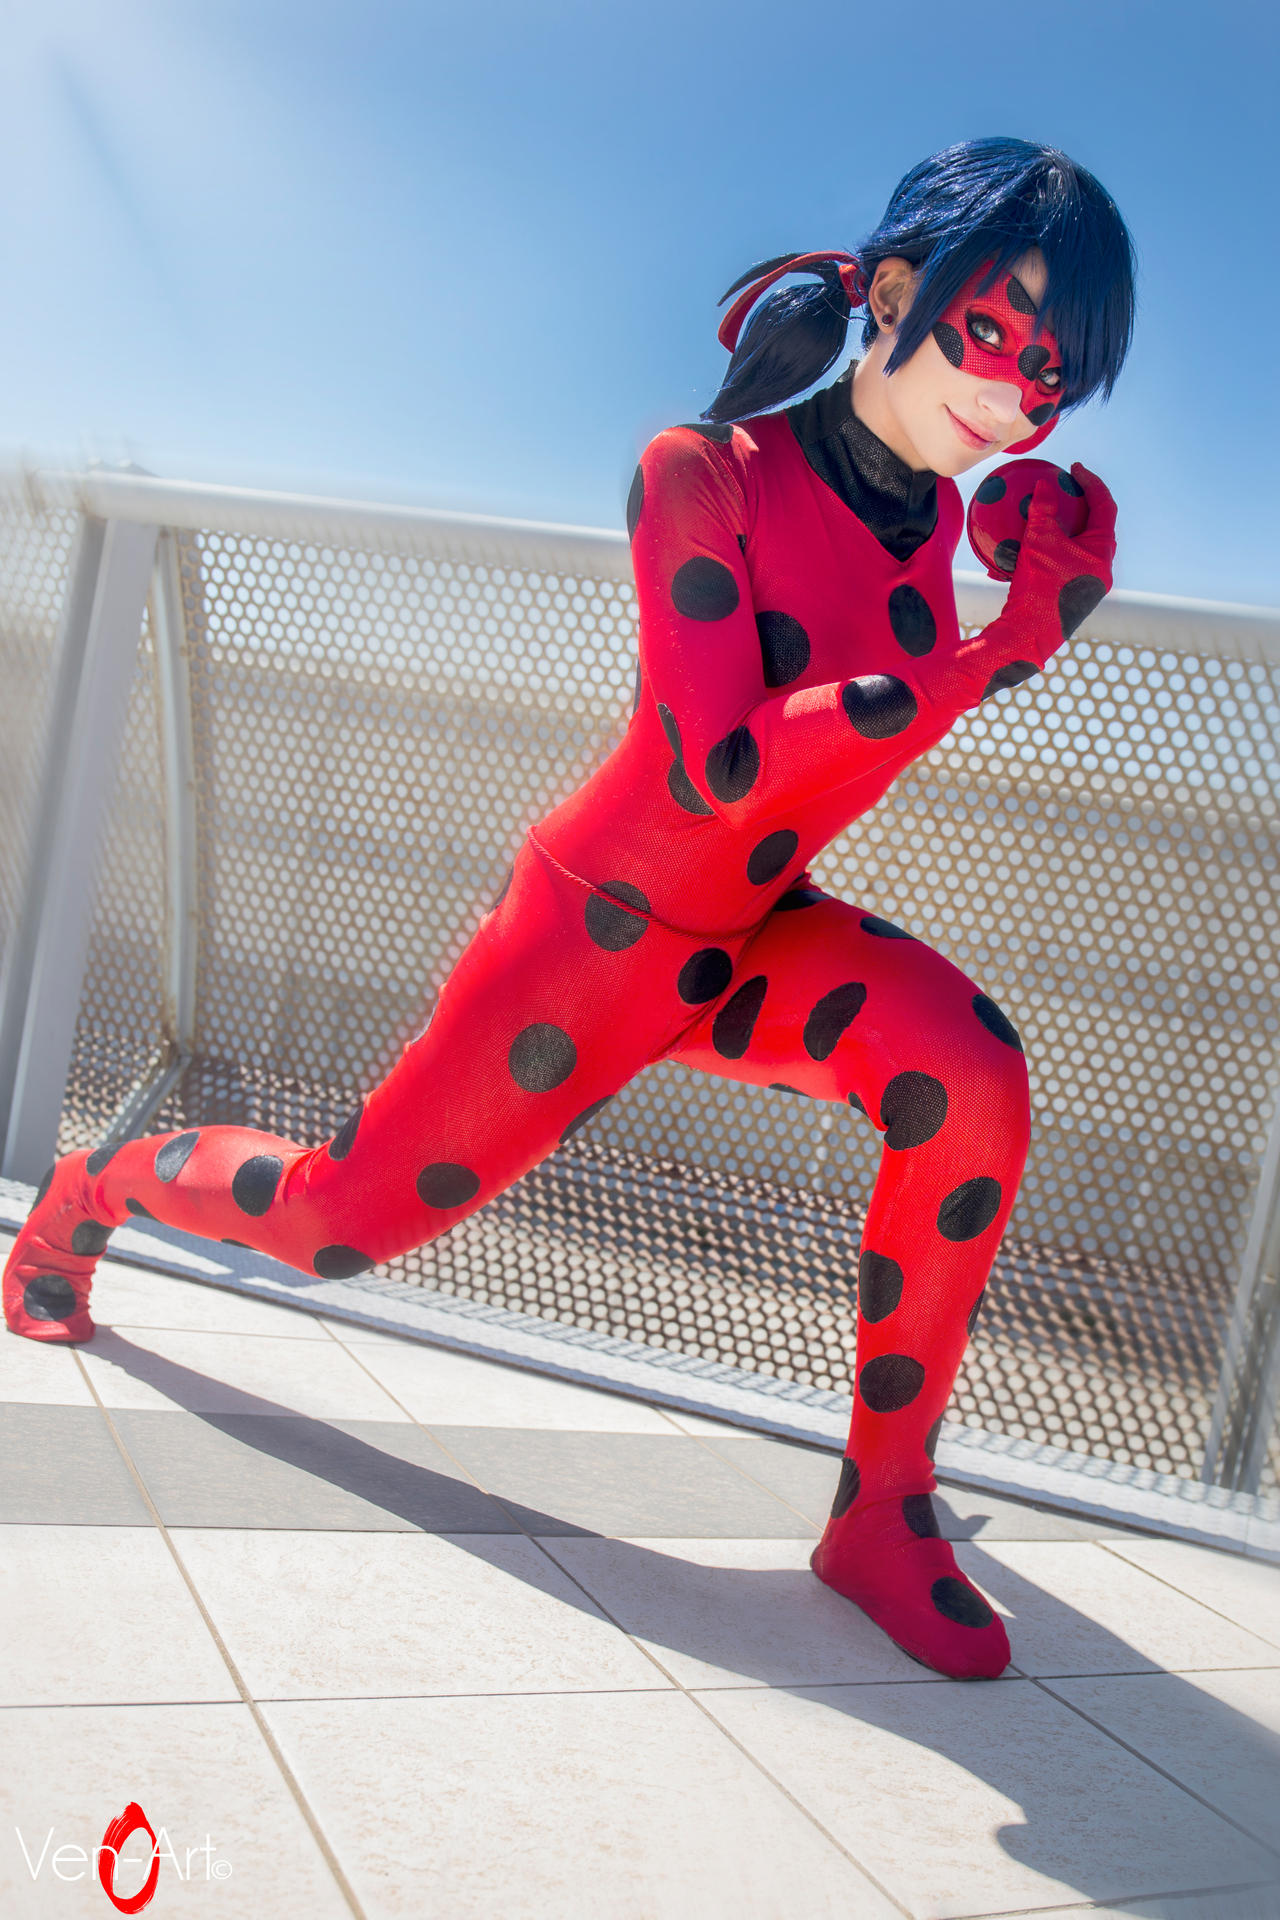 Ladybug and Chat Noir cosplay by KICKAcosplay on DeviantArt